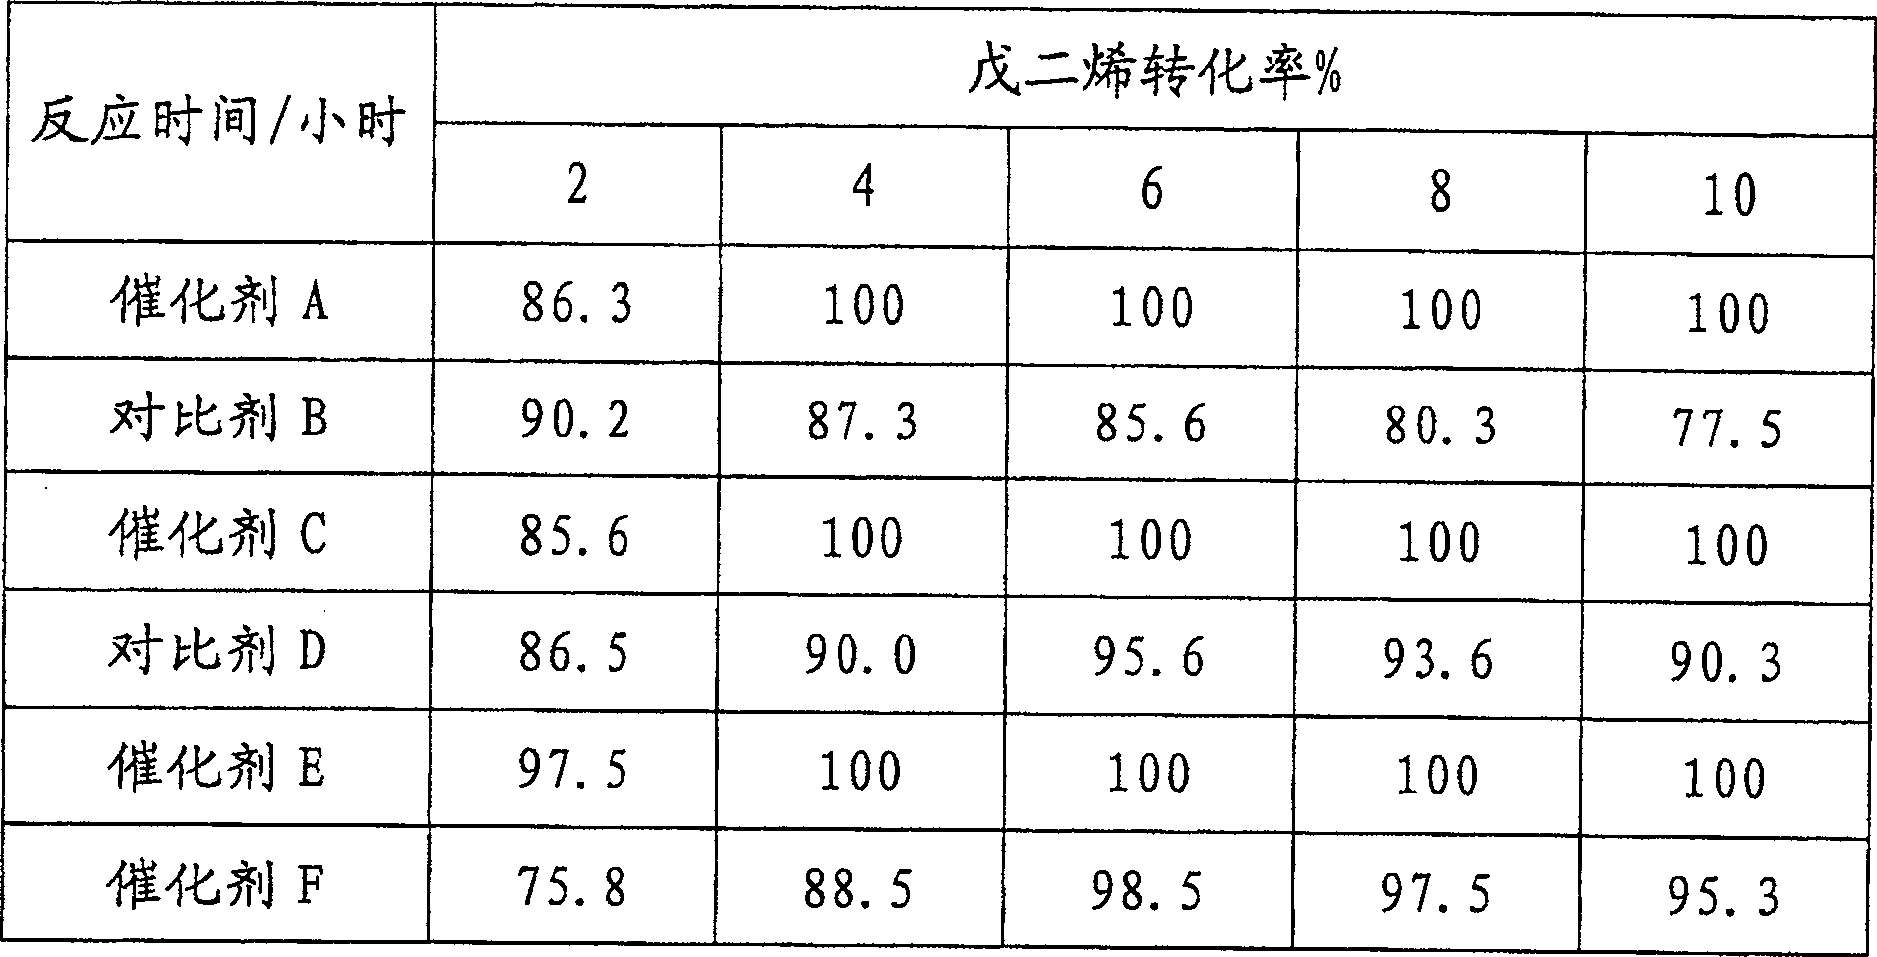 Diene selection hydrogenation catalyst, and preparation method